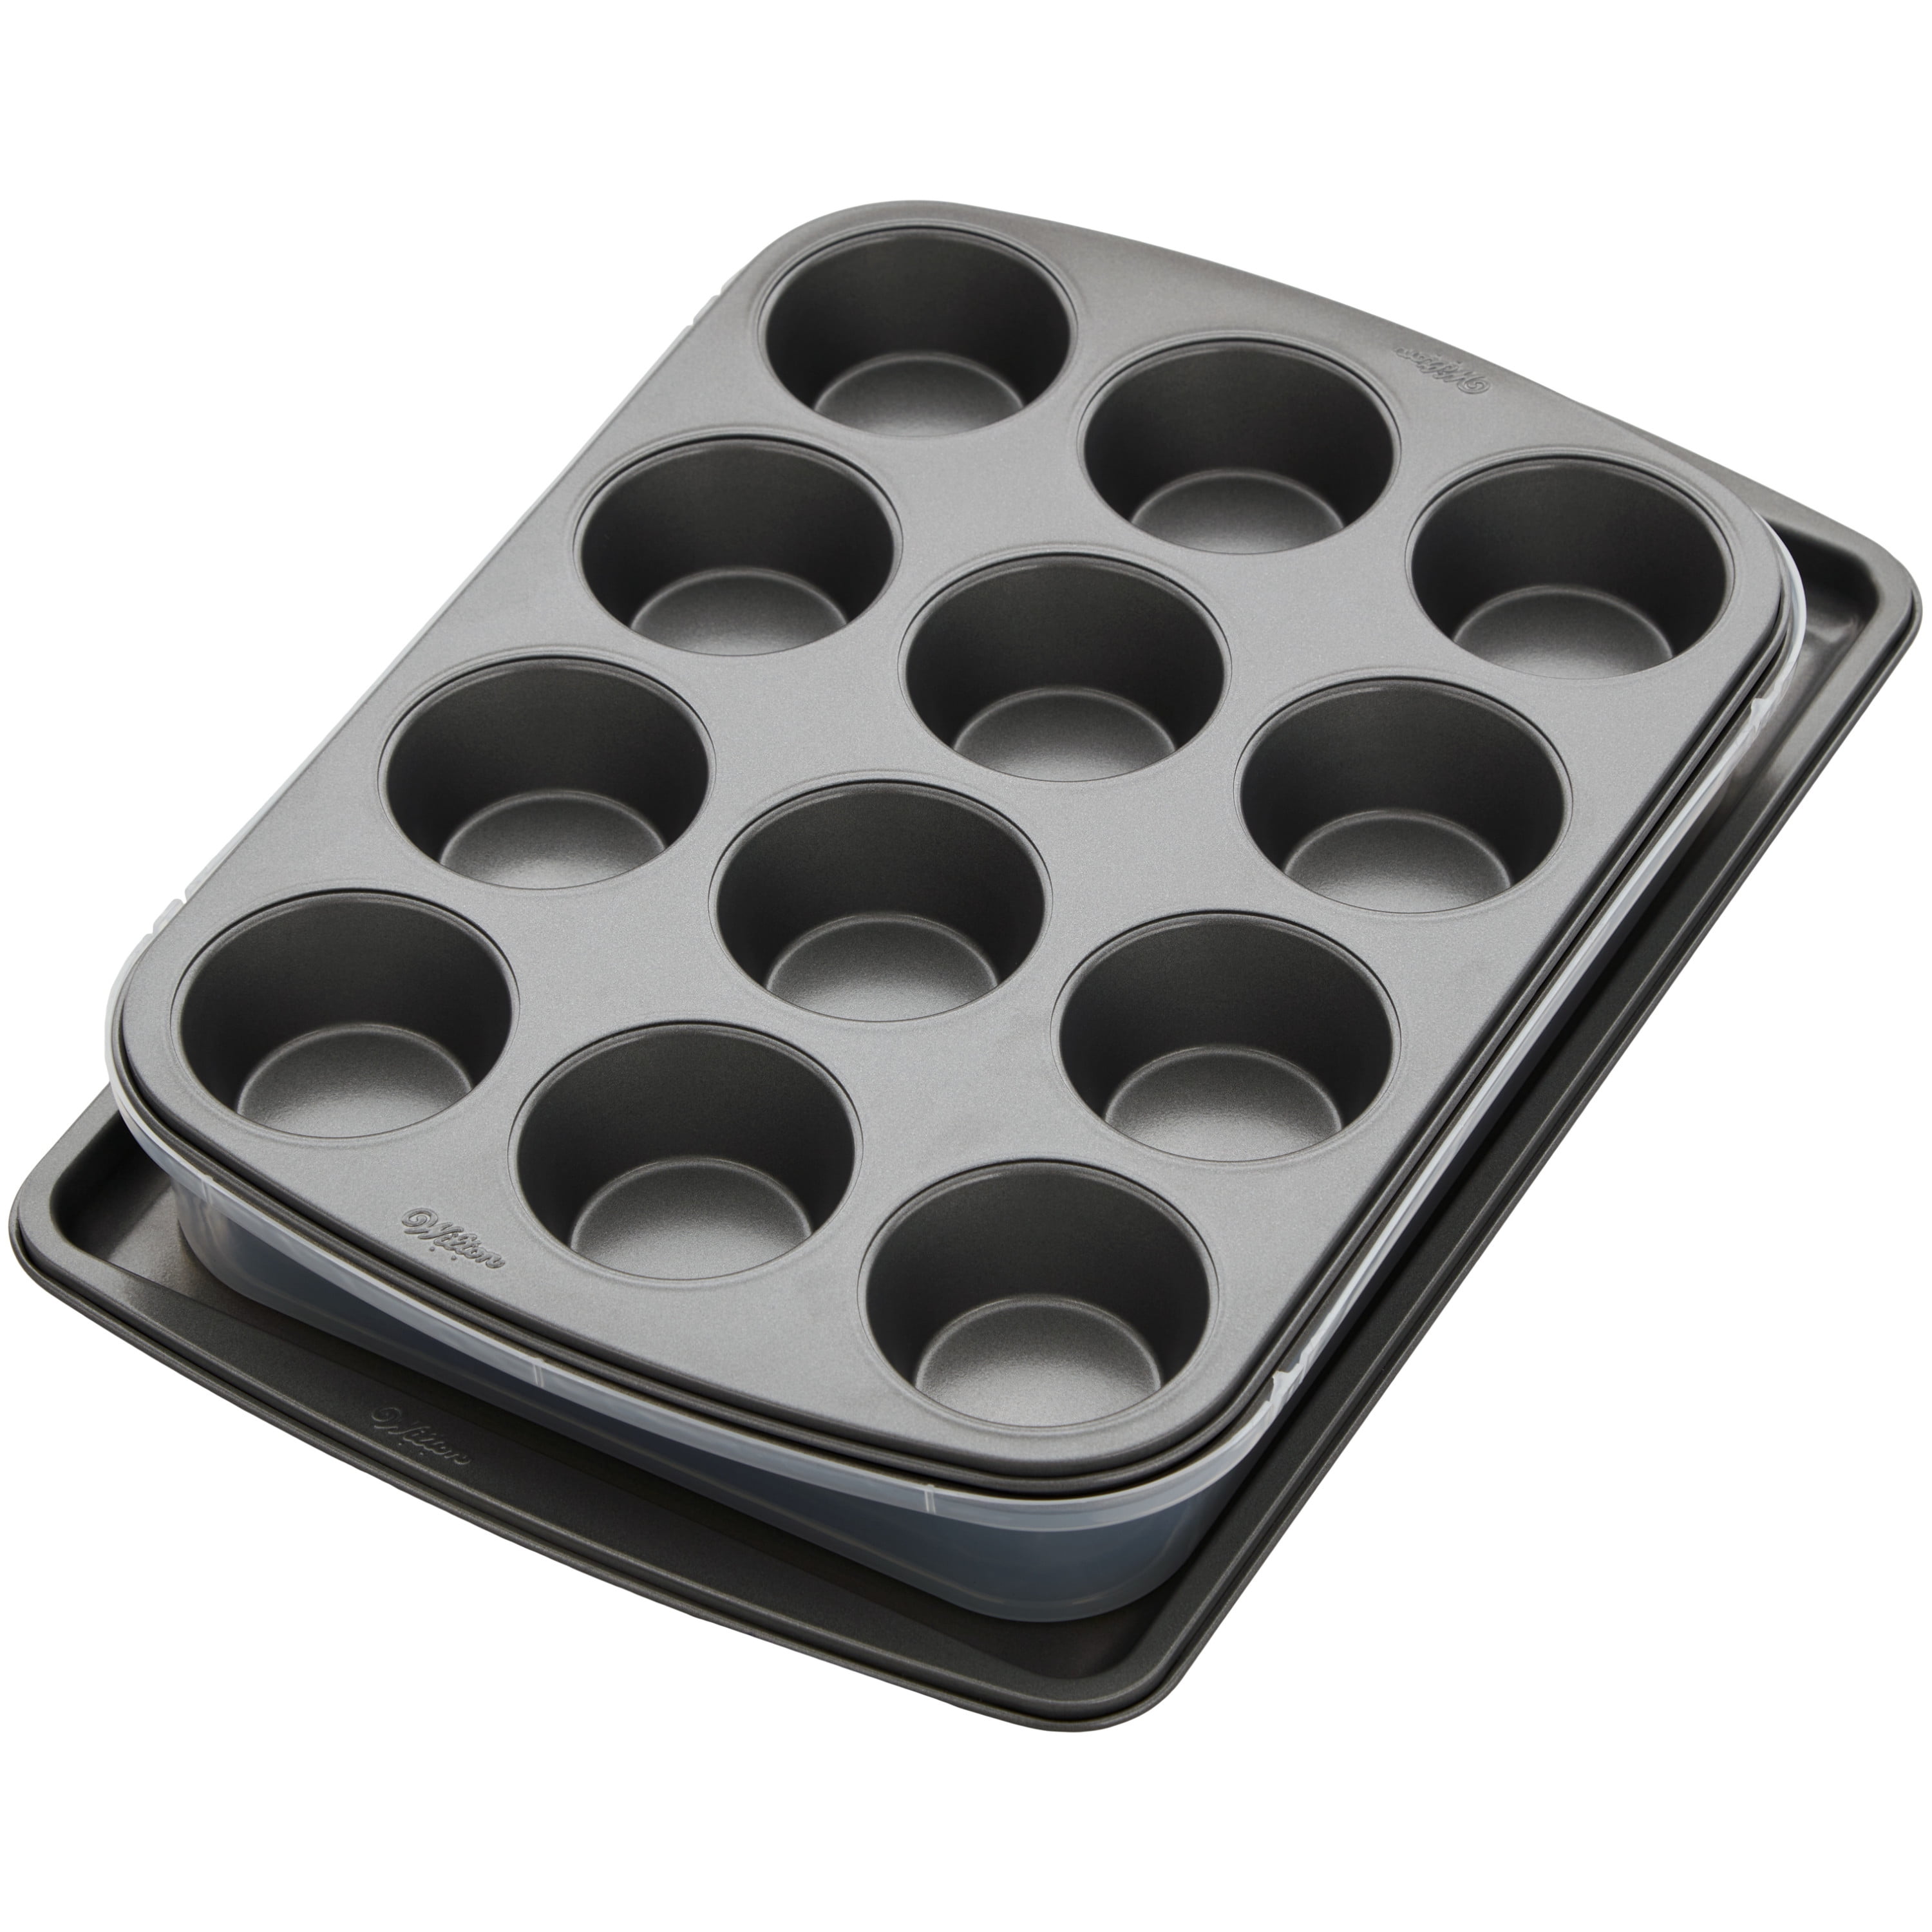 4 pc Nonstick Bakeware Toaster Oven Set Cookie Sheet Muffin Tin